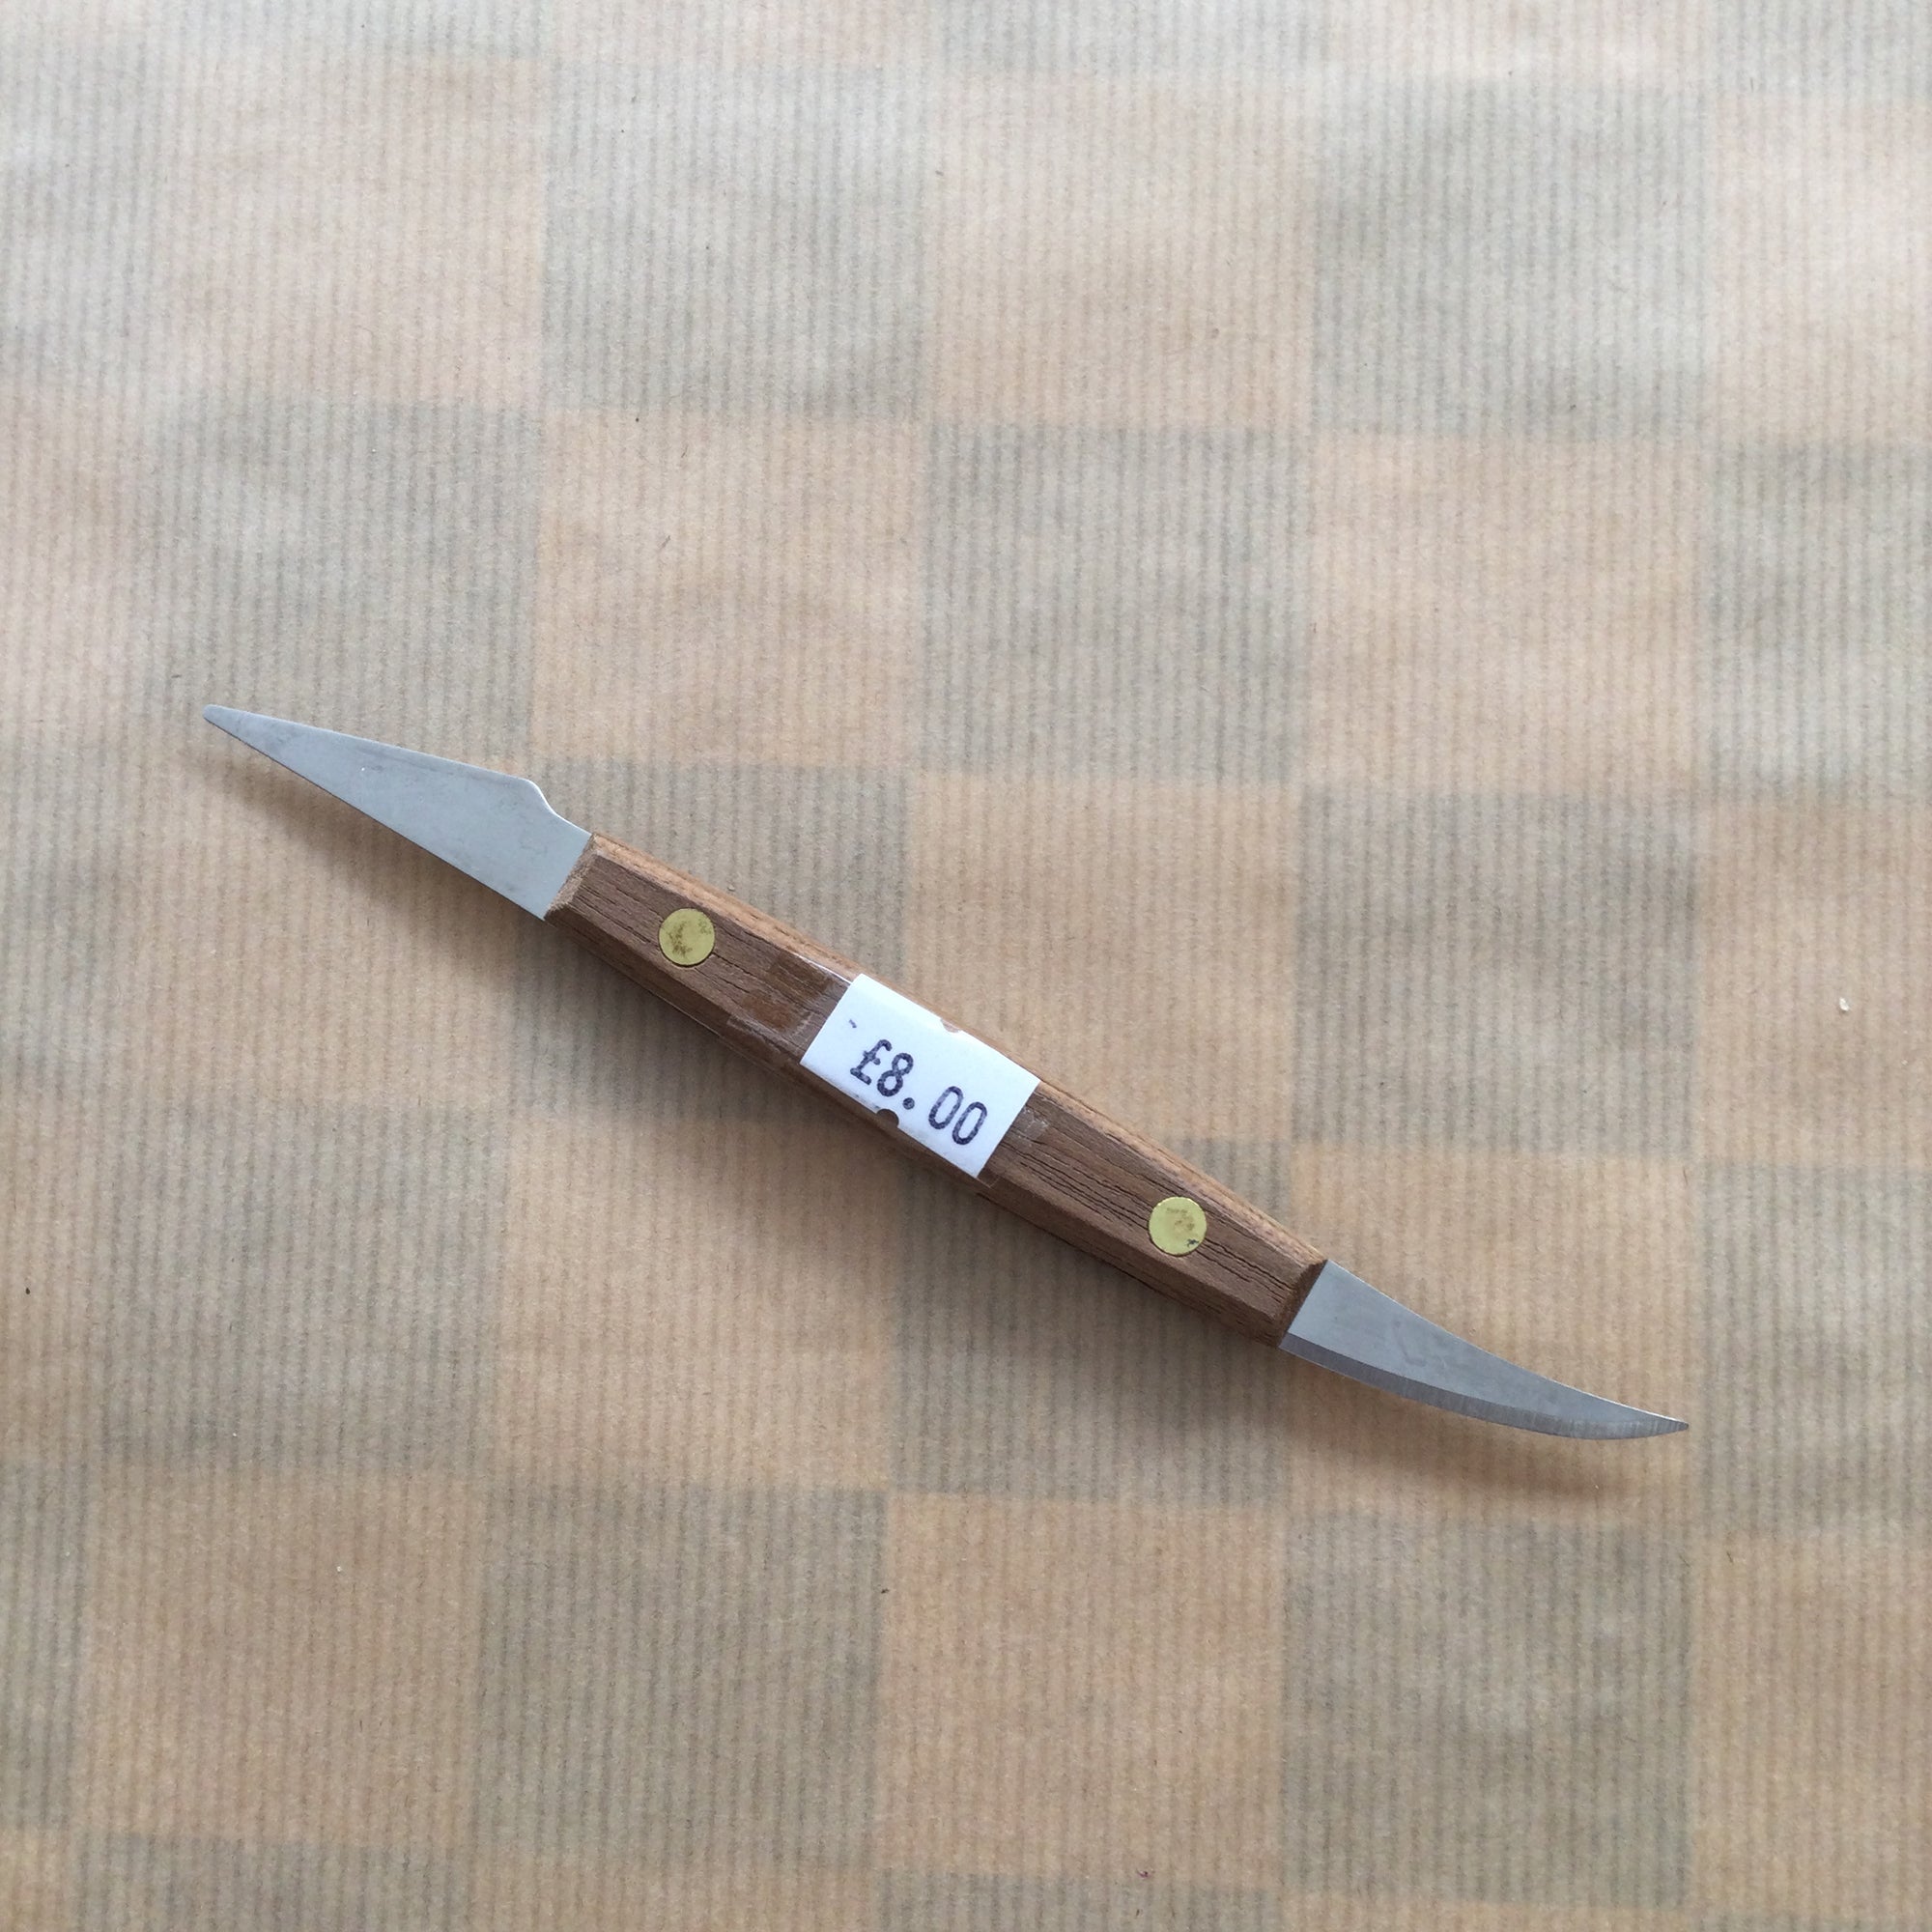 Wooden Double Ended Pottery Knife